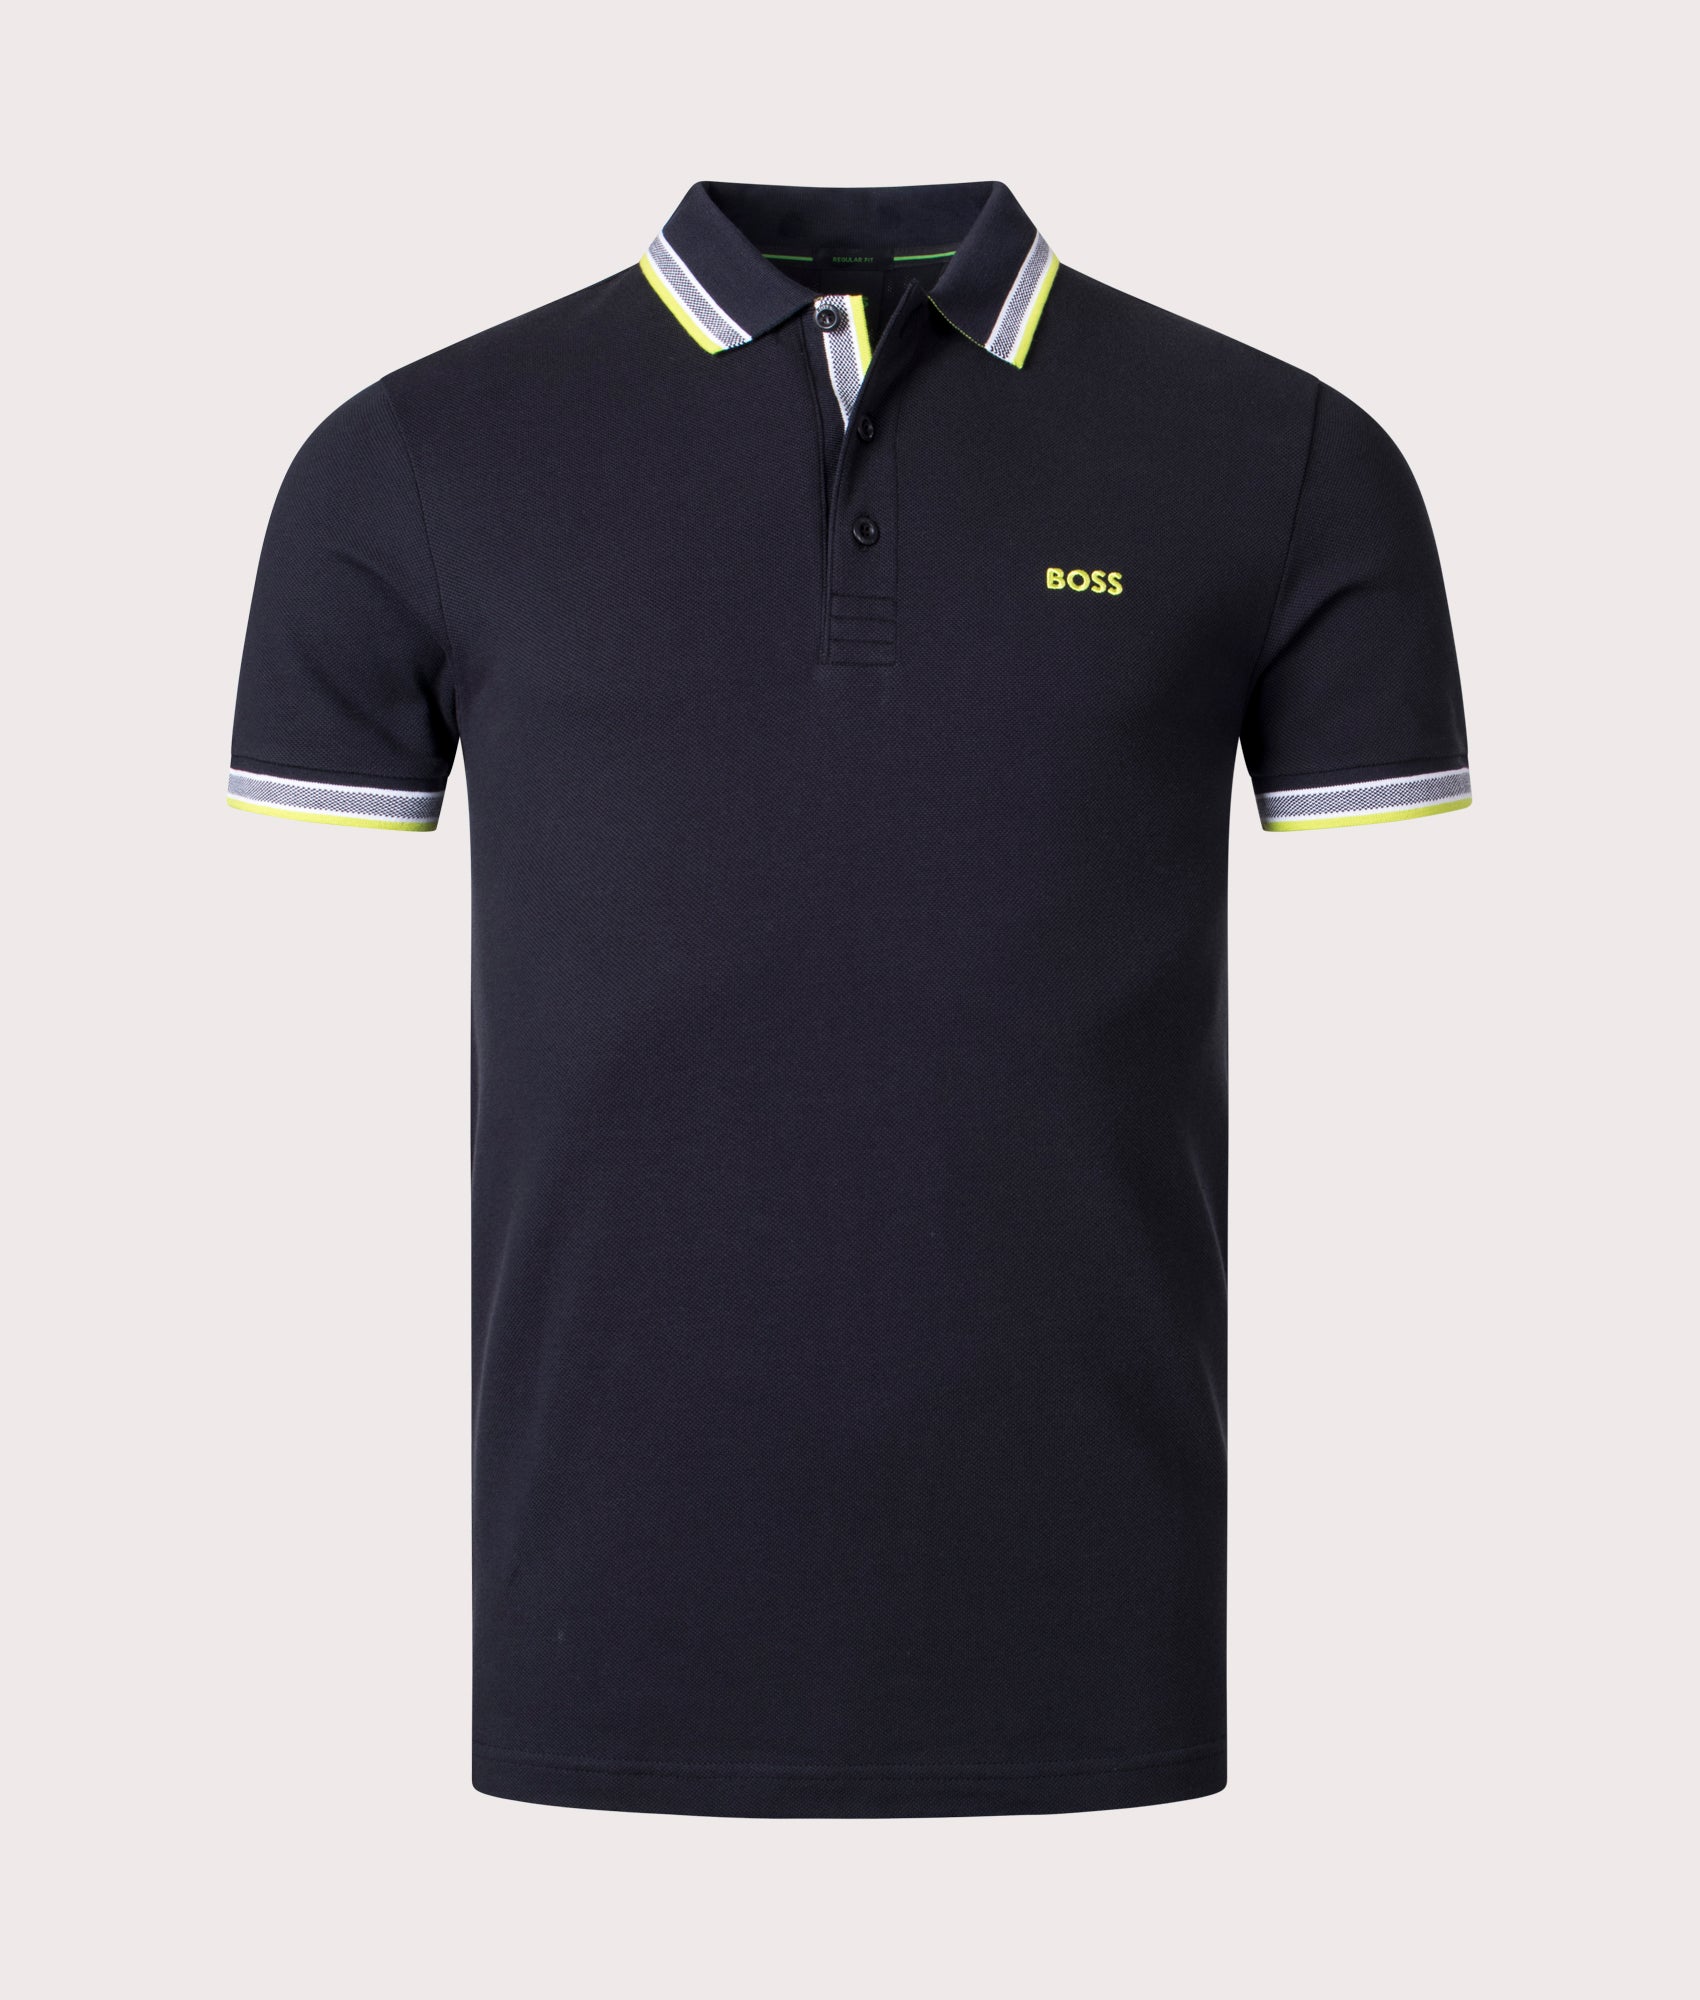 BOSS Mens Paddy Polo Shirt - Colour: 012 Charcoal - Size: Large